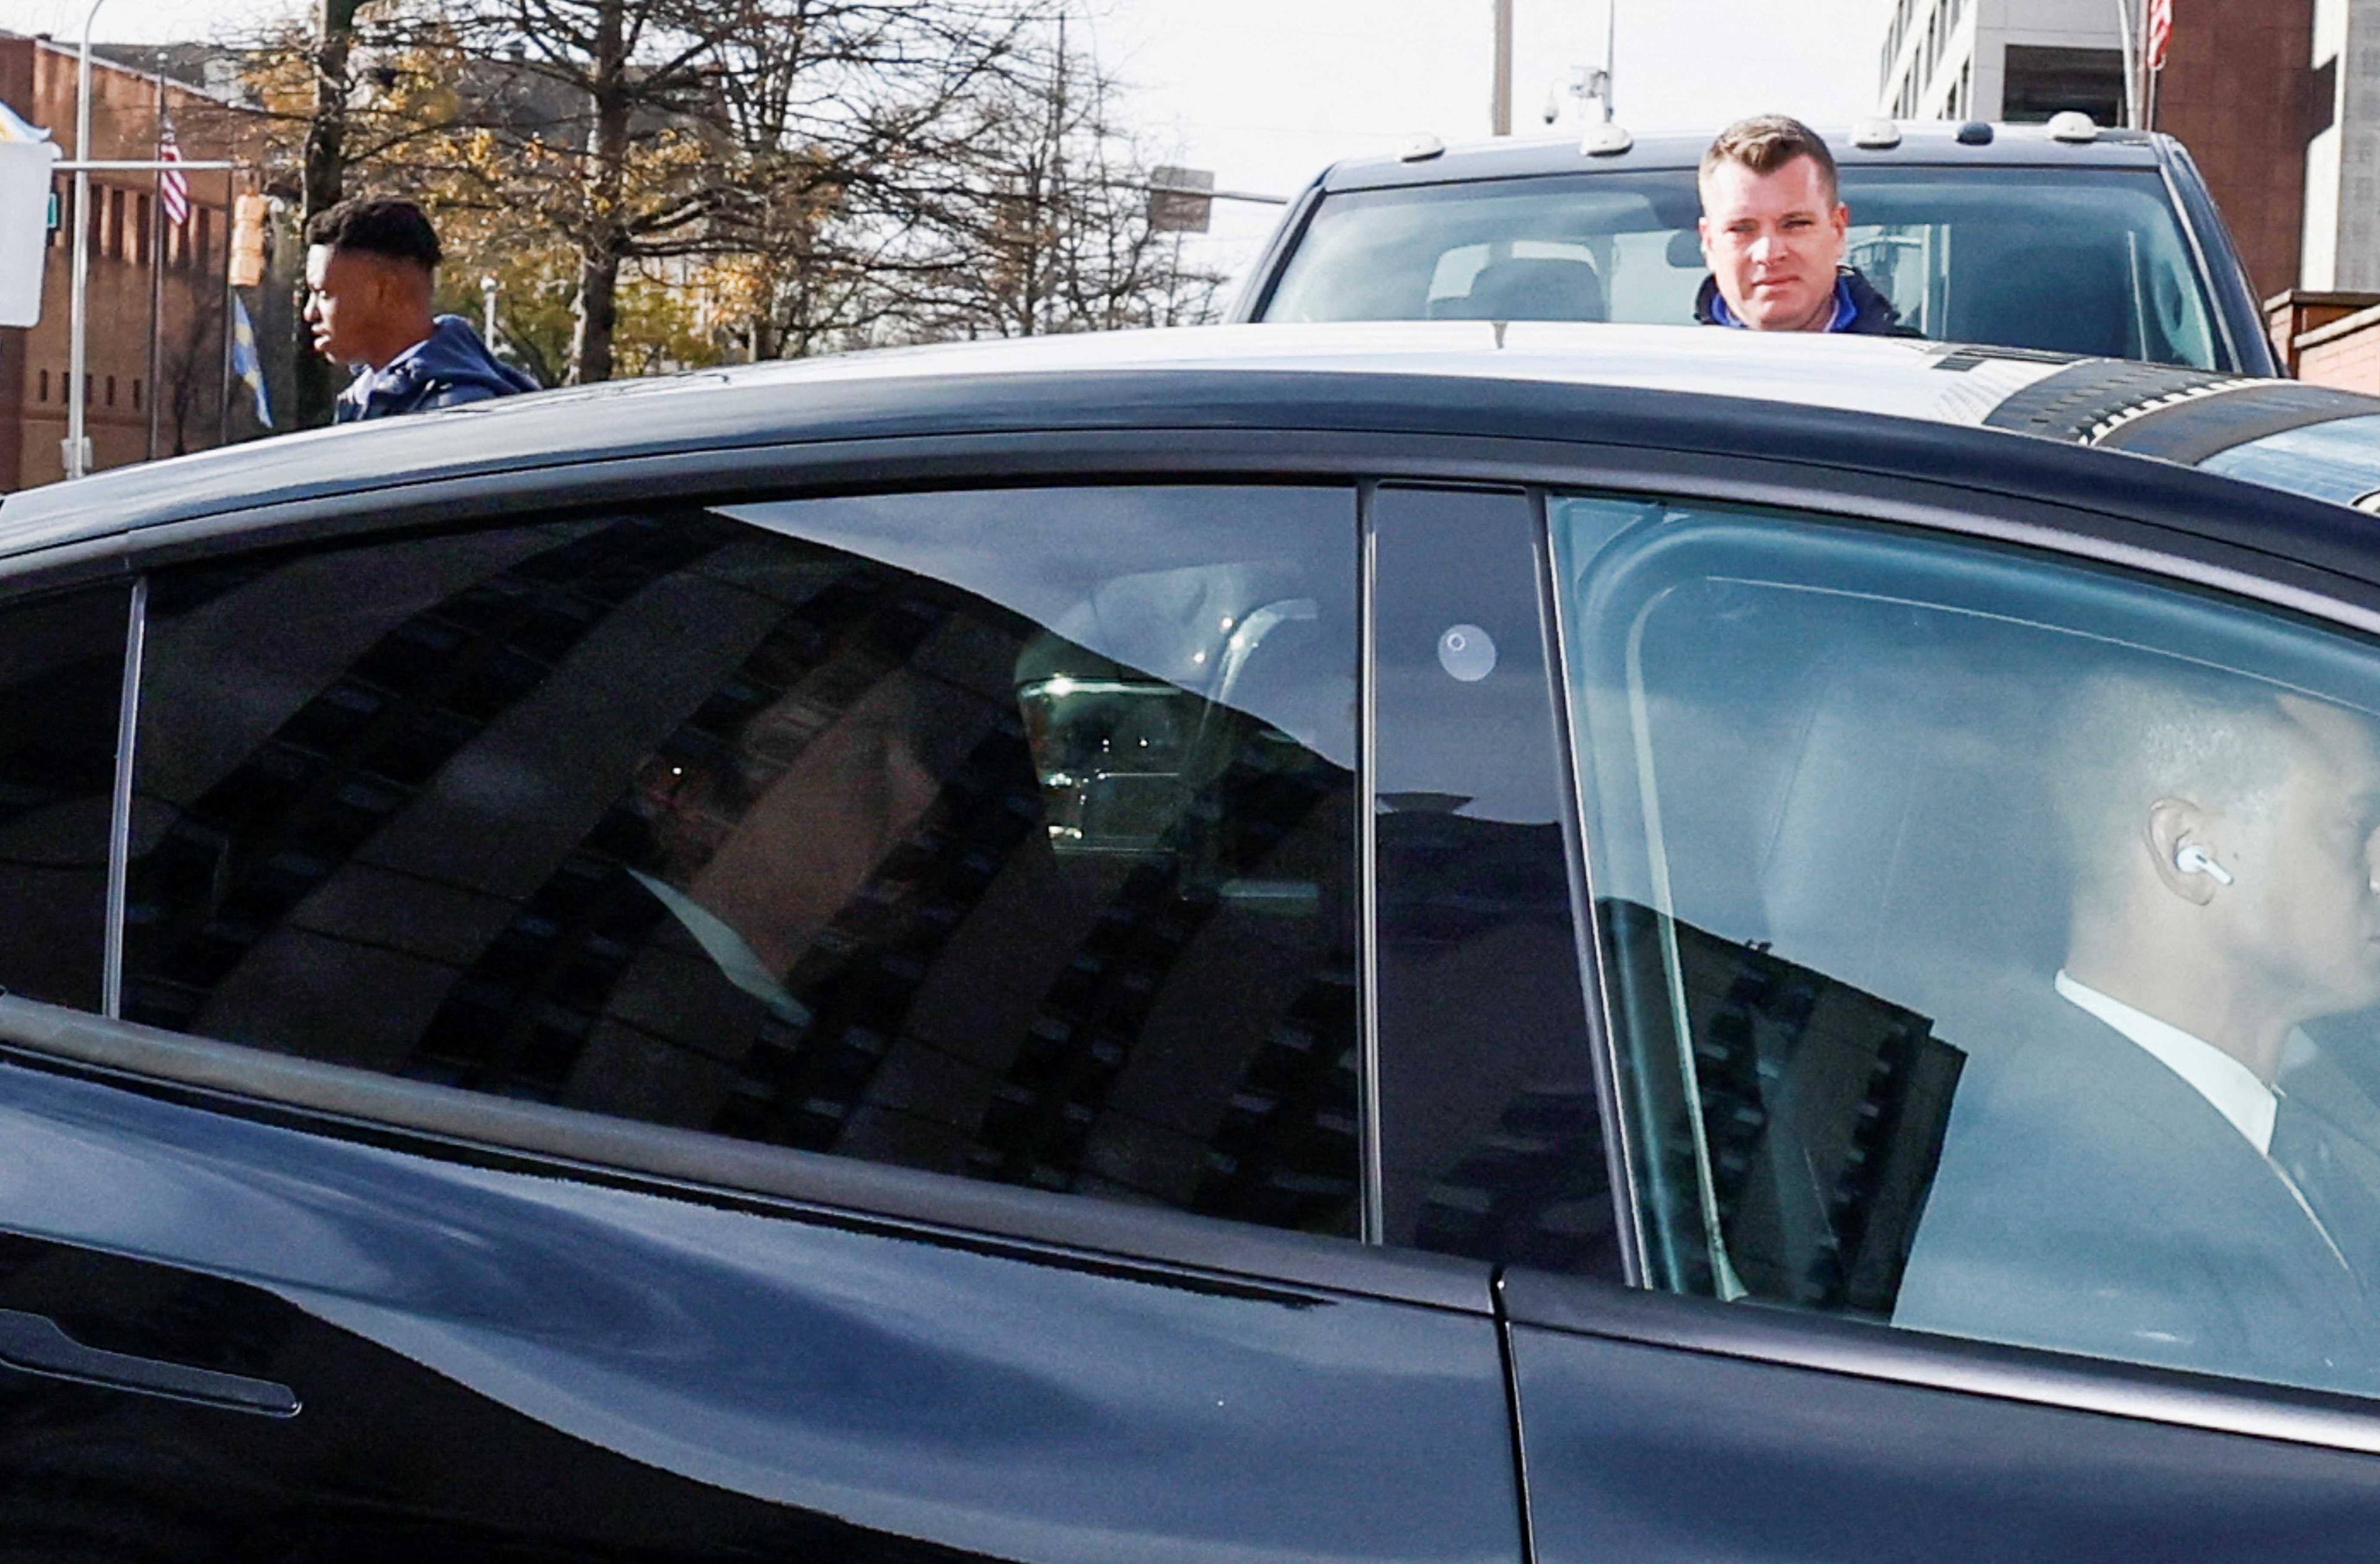 Elon Musk, CEO of SpaceX, Tesla and Twitter, arrives for a trial about his Tesla pay package at the Delaware Court of Chancery in Wilmington, Delaware, US, Nov 16. Photo: Reuters